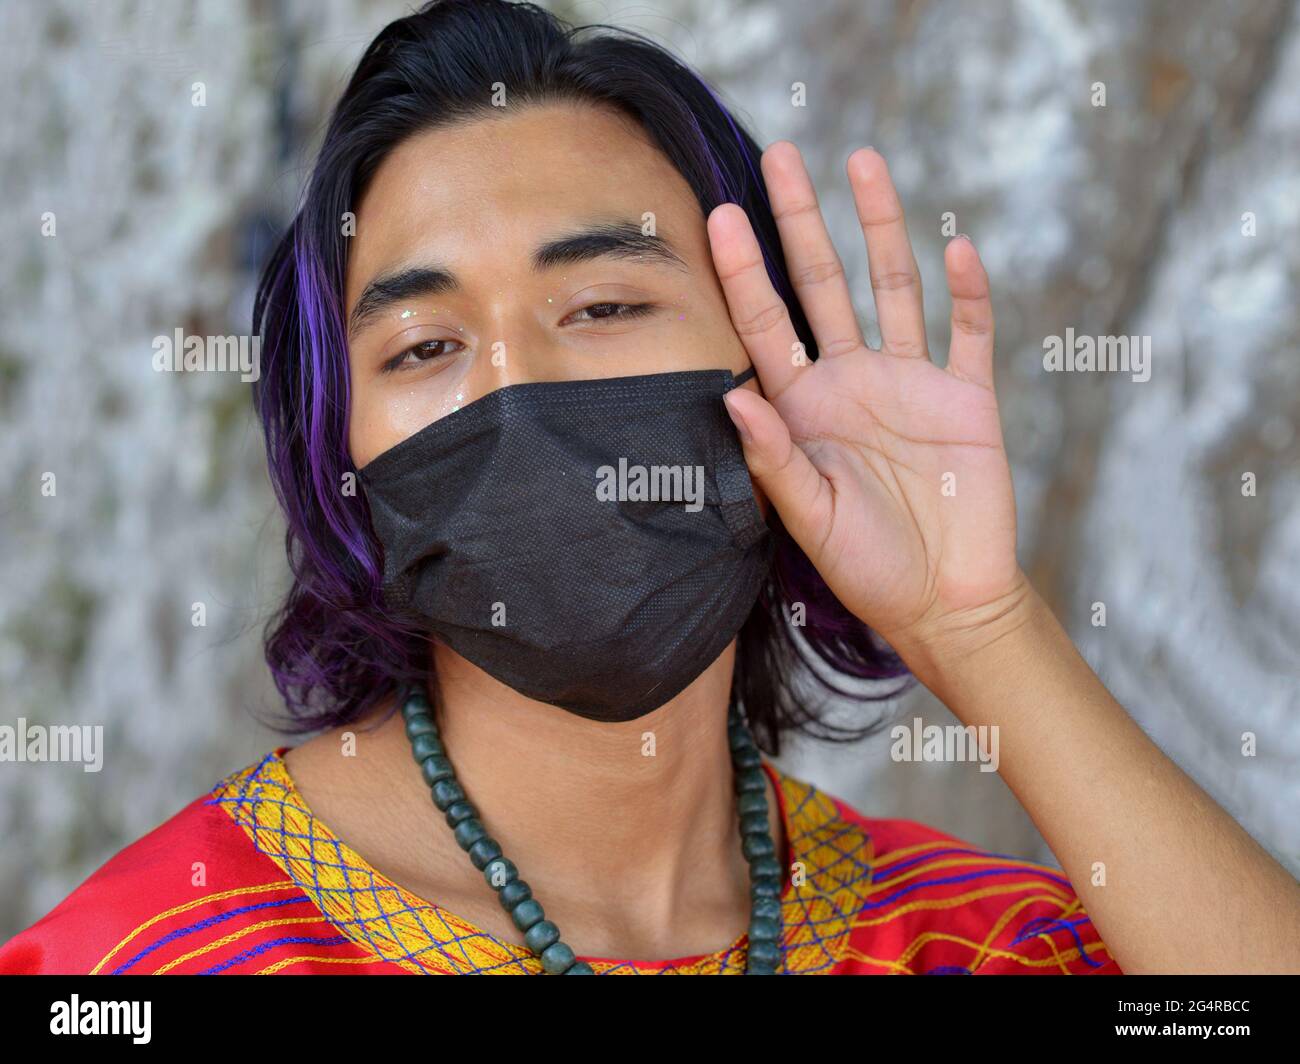 Handsome young Mexican man with blue purple dyed hair streak wears a black face mask during the global coronavirus pandemic and looks at the camera. Stock Photo